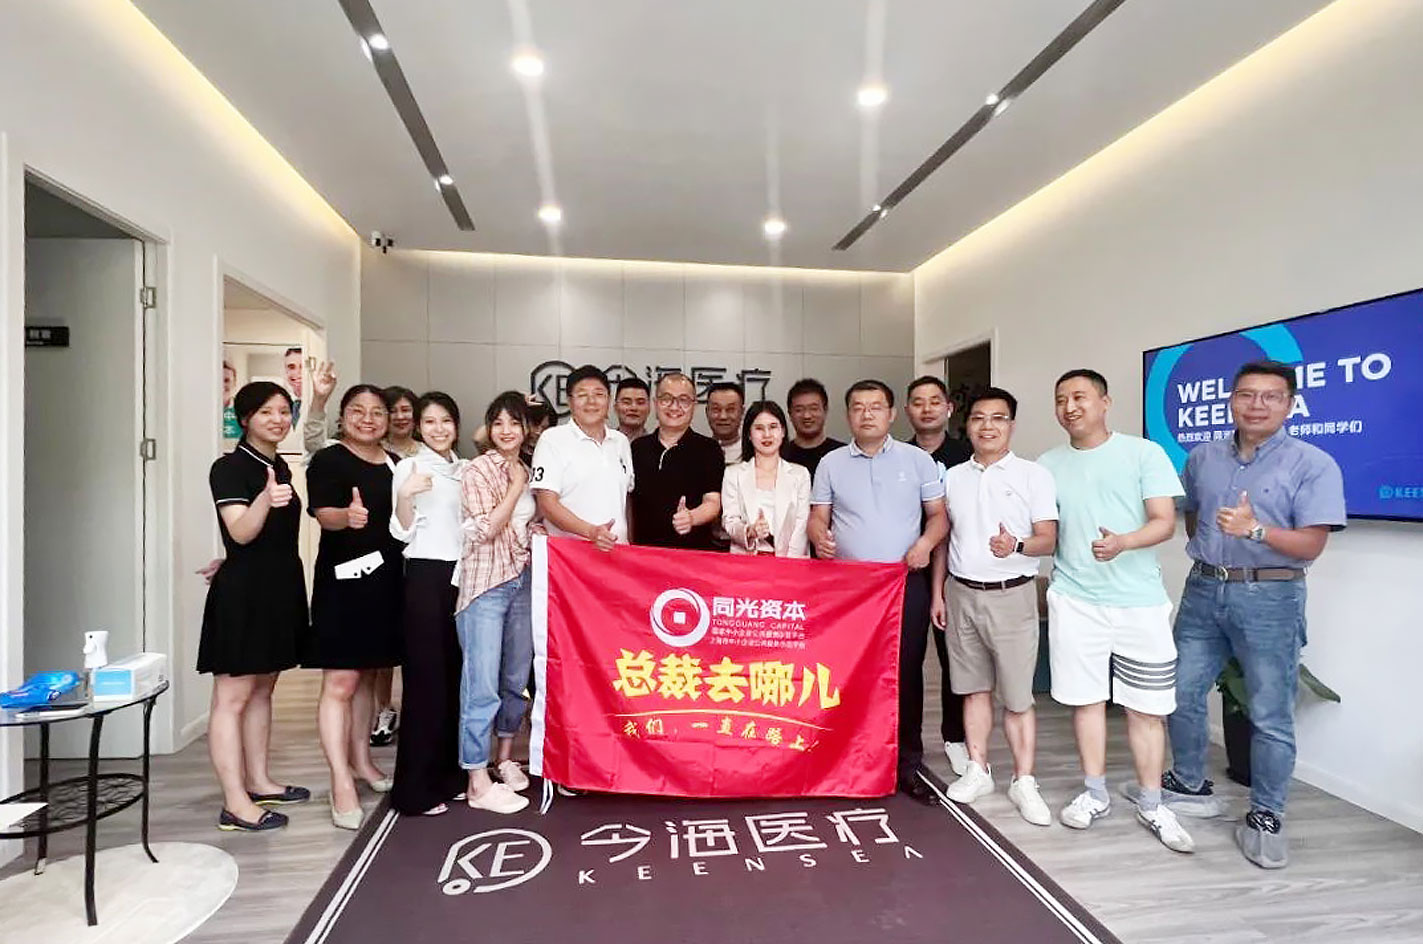 Tongguang Capital's outstanding business elites gather at Jinhai Medical to discuss the future development of the medical industry